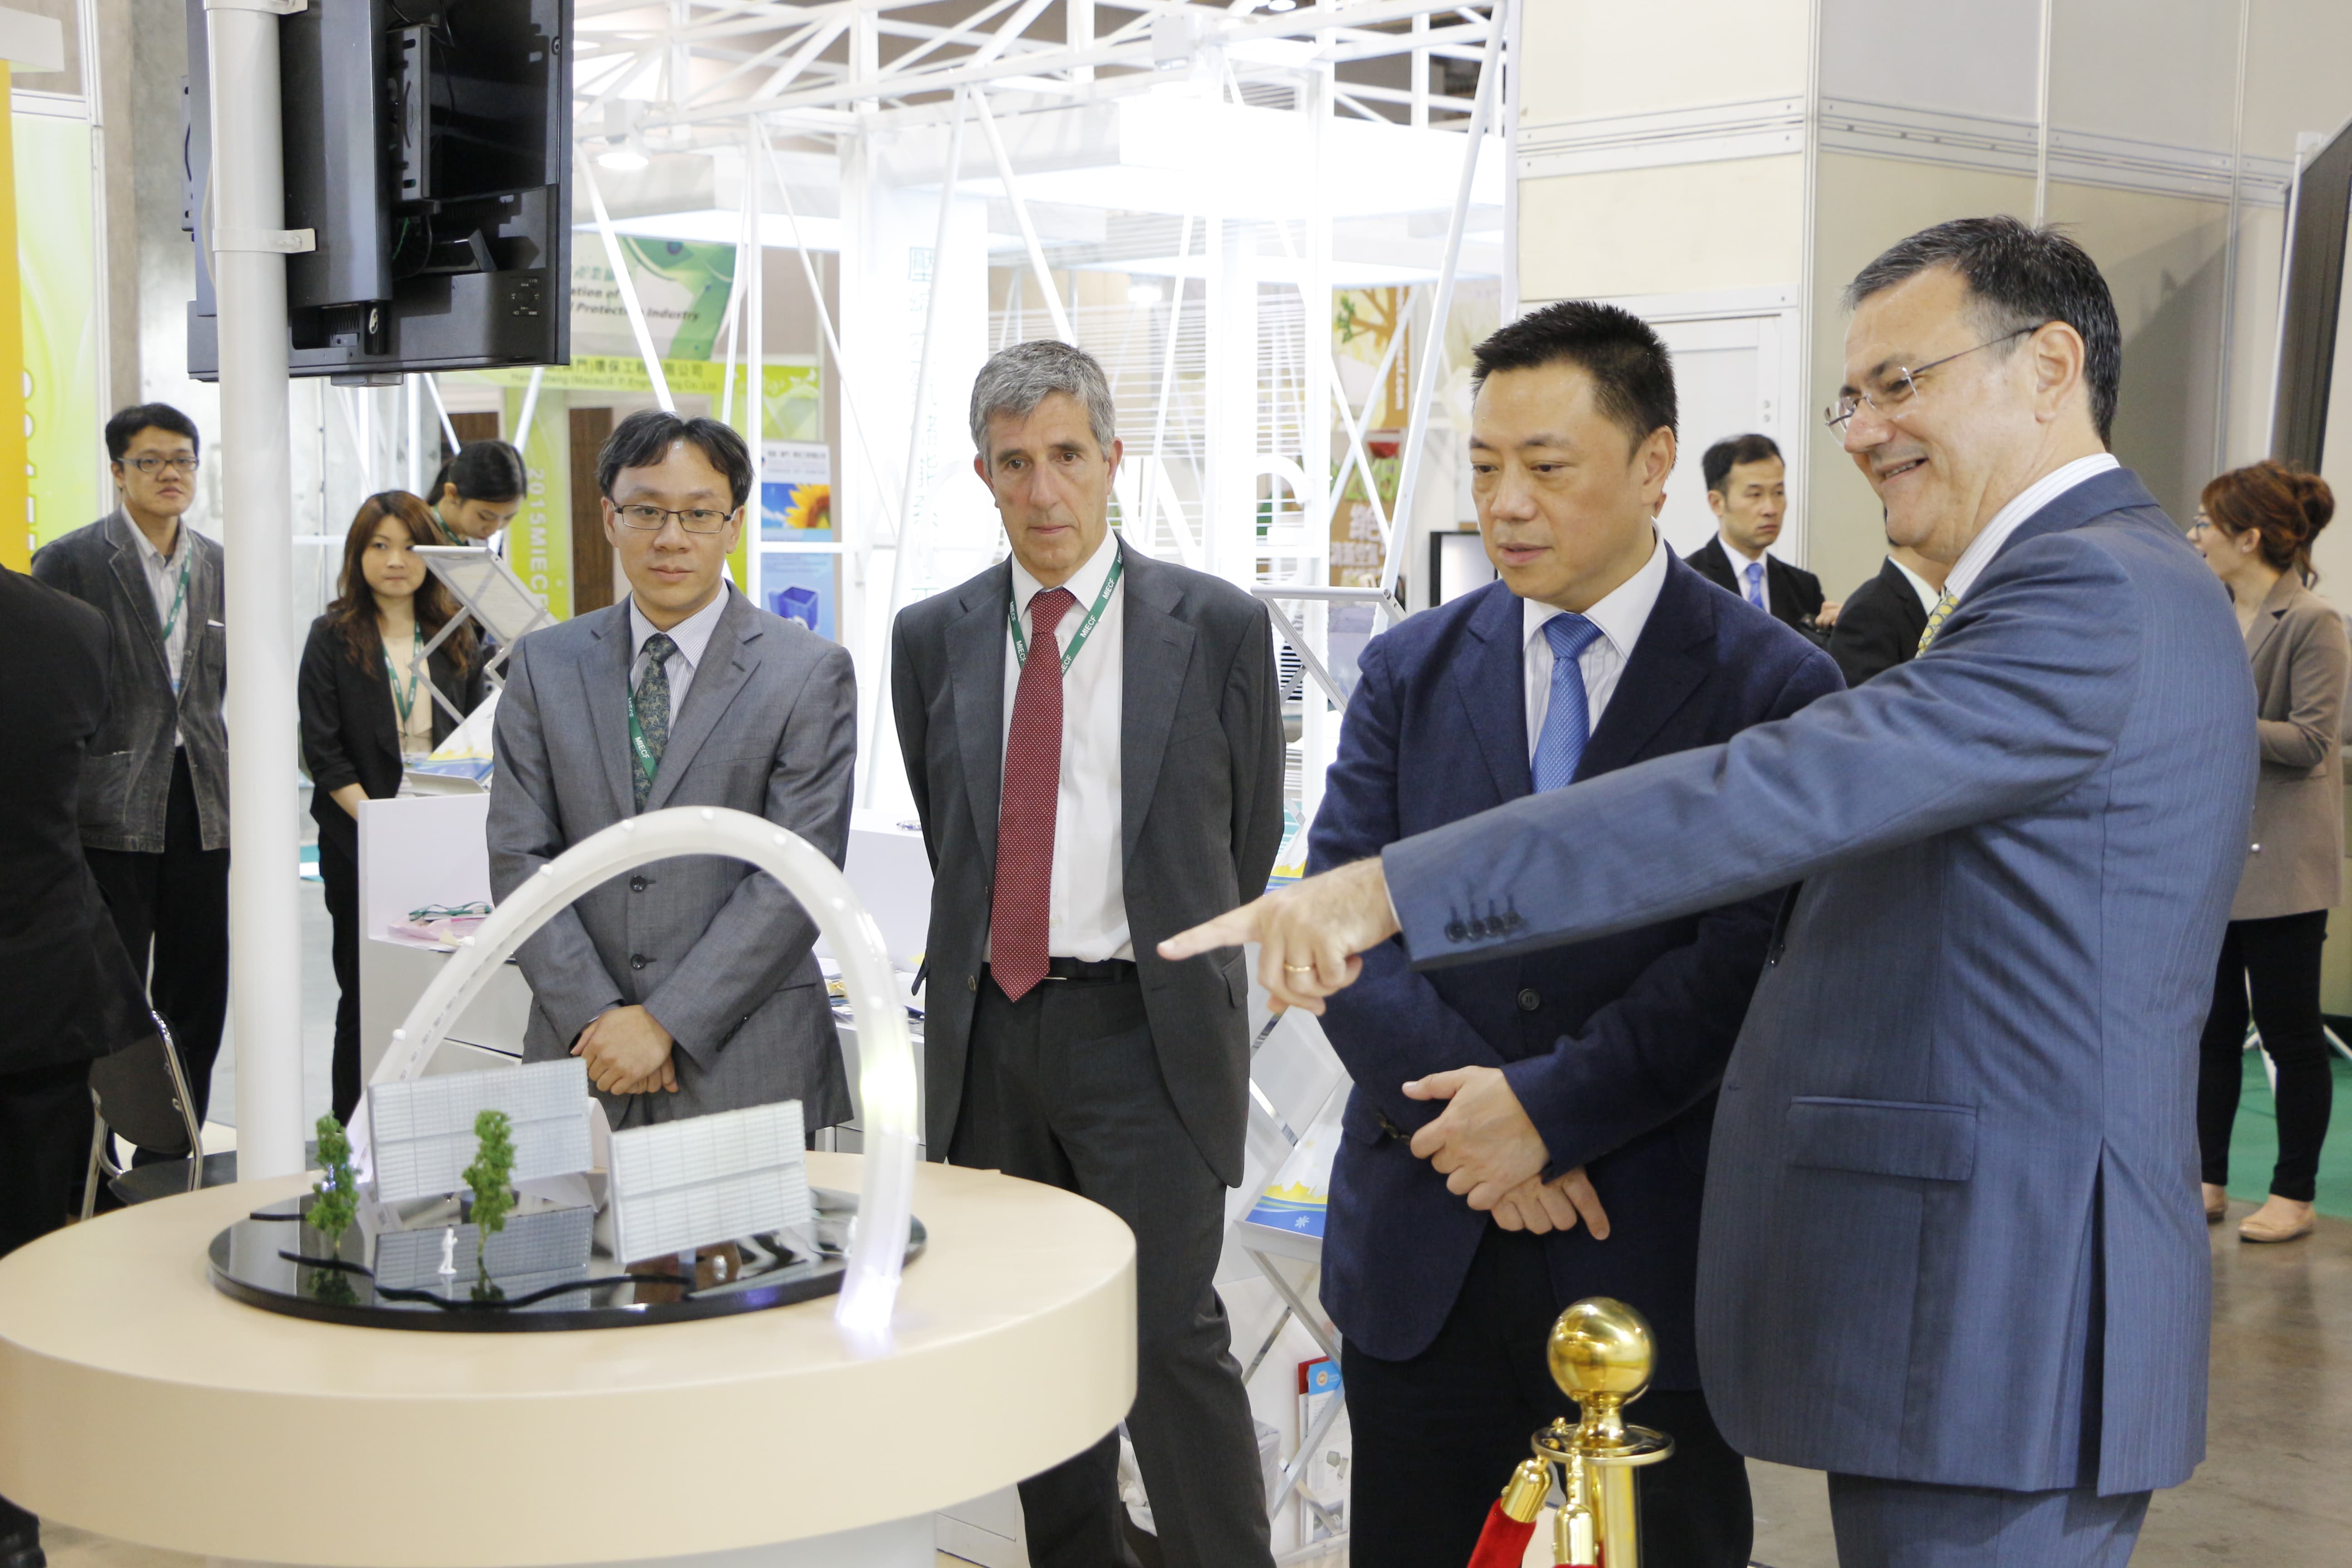 CESL Asia discloses new ventures at MIECF: industrial laundry in Macau and solar energy in Portugal